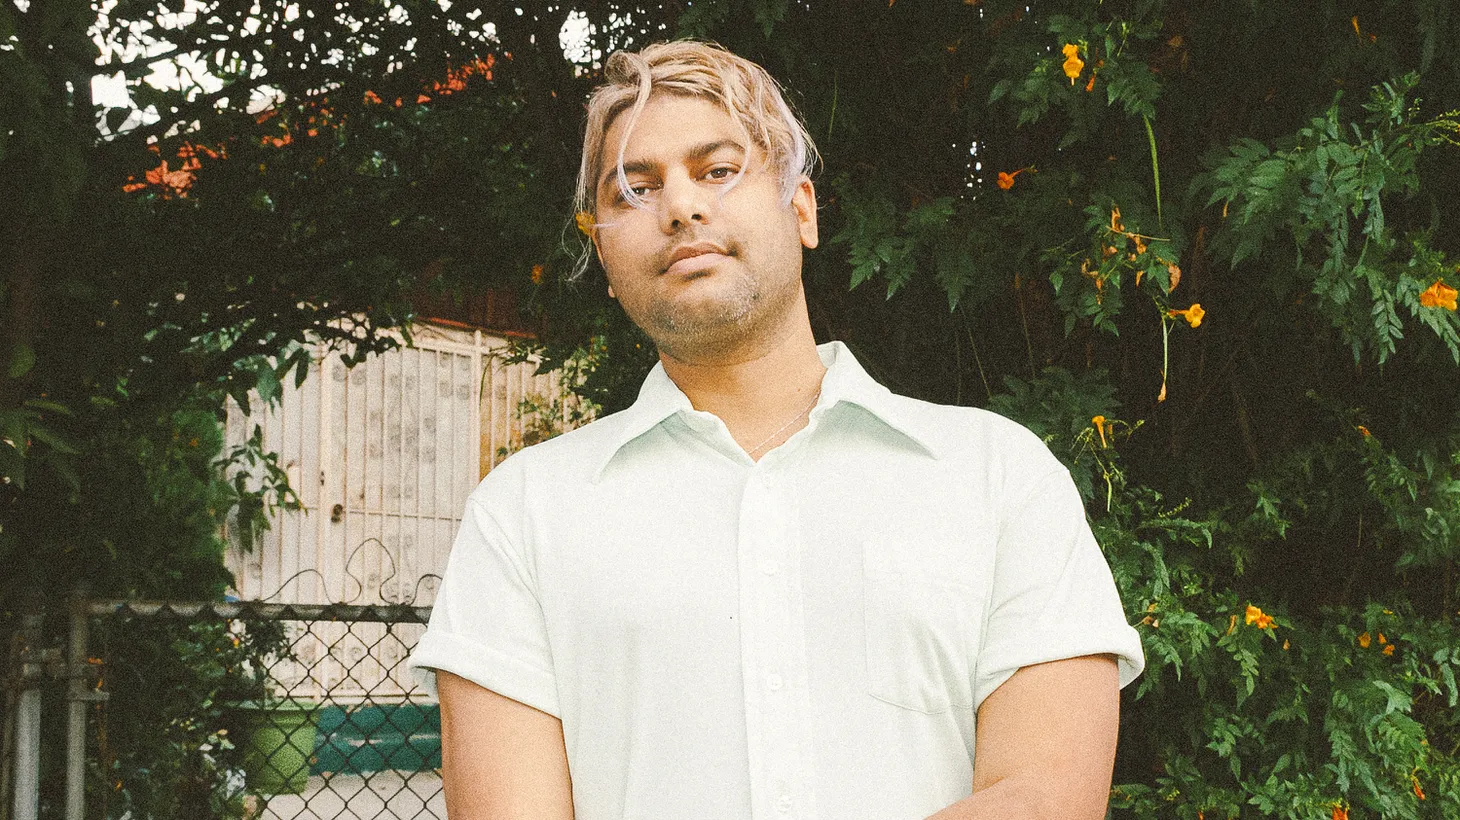 LA’s Bangladeshi-American punk rocker Nadu is in love! And ready to share his new song “Good To Me,” celebrating the joys of finally finding and trusting a life partner while also fearing losing them.